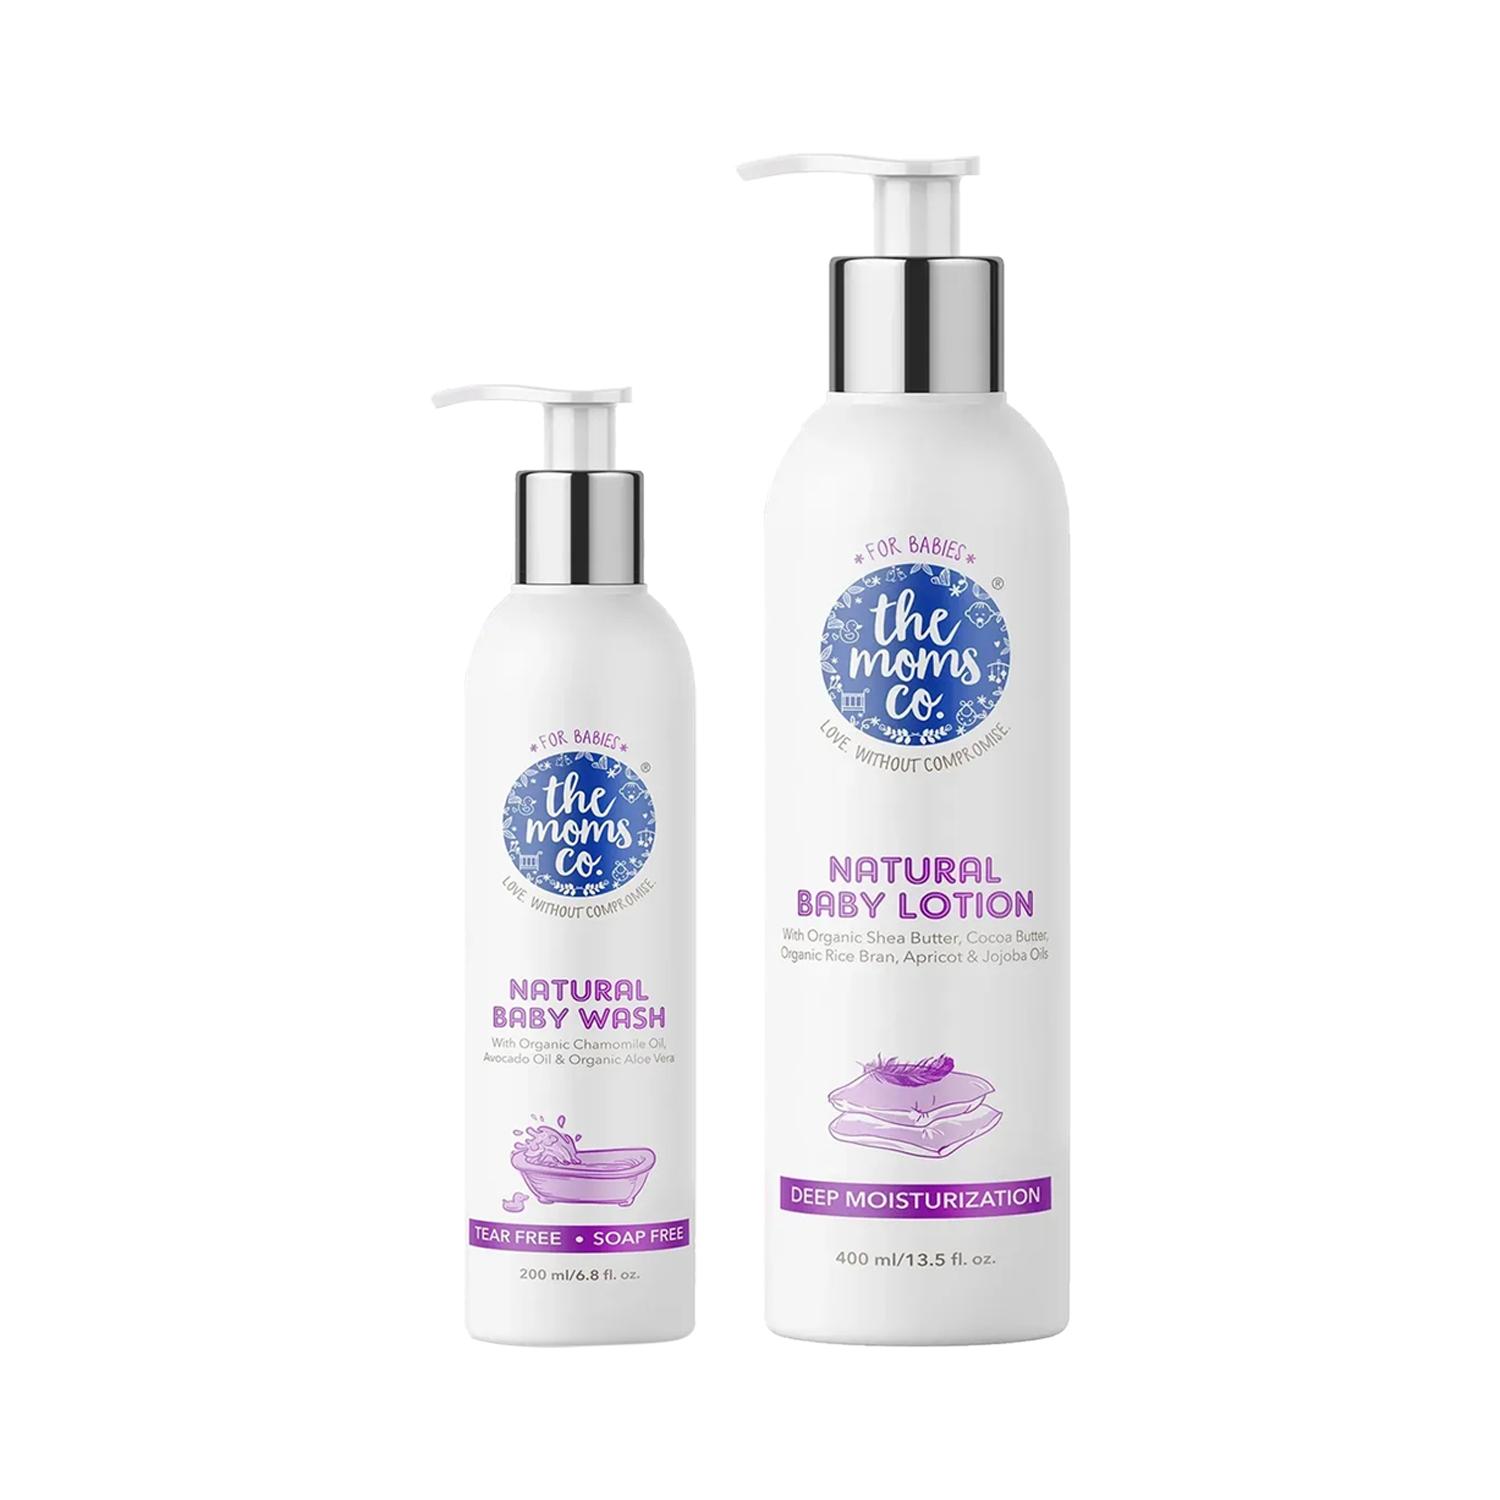 The Mom's Co. | The Mom's Co. Baby Wash (200ml), Baby Lotion with Shea Butter Apricot & Jojoba Oil (400ml) Combo